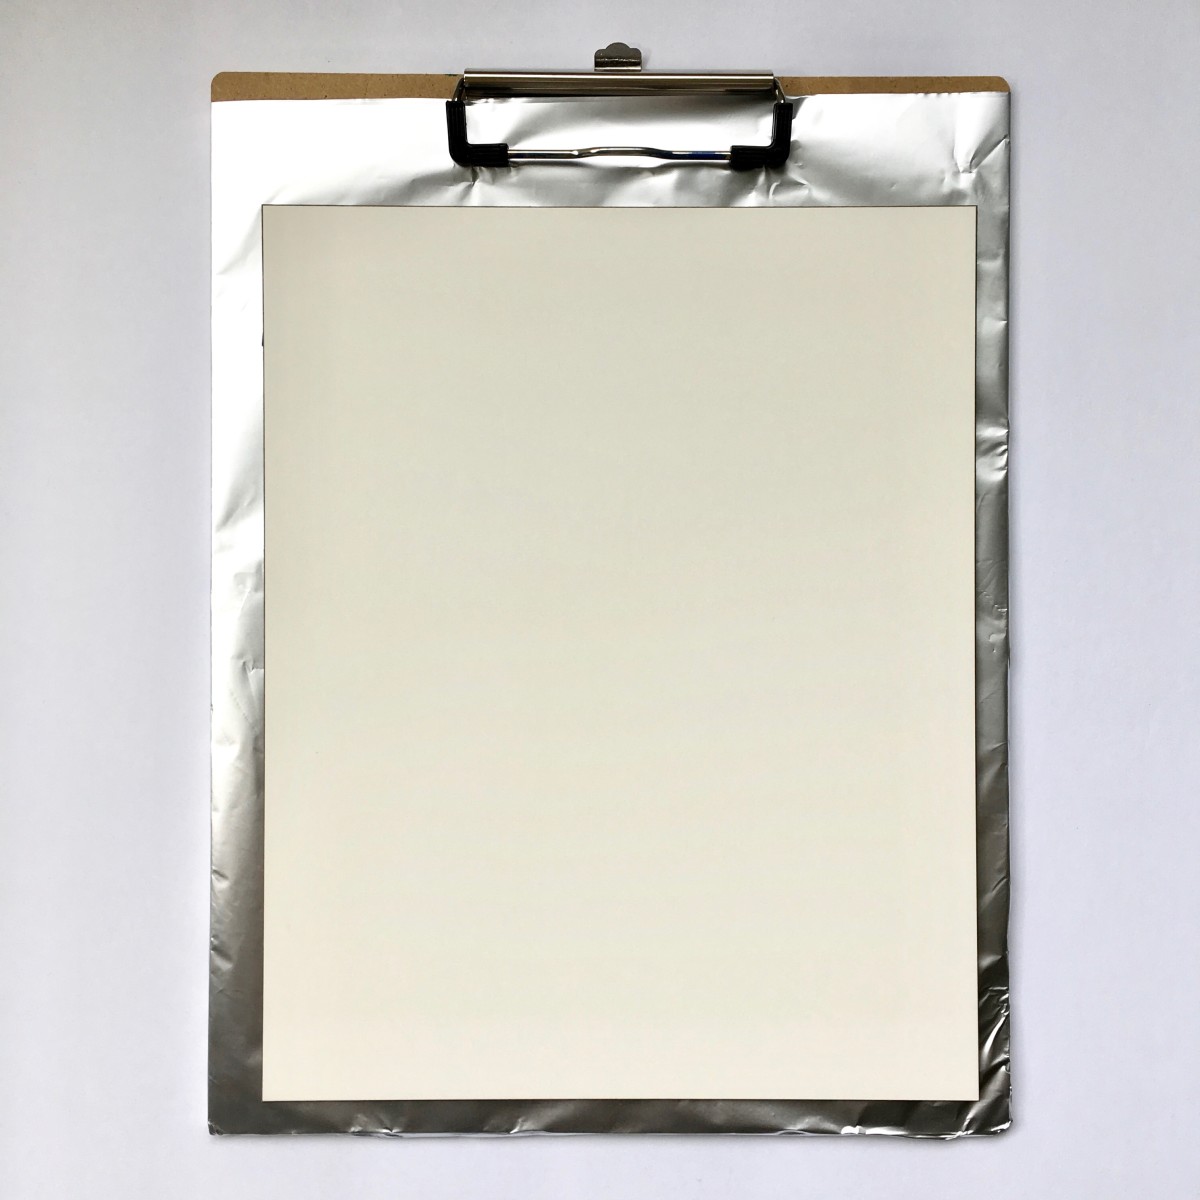 A clipboard covered with foil gives a flat, stable surface to work on.